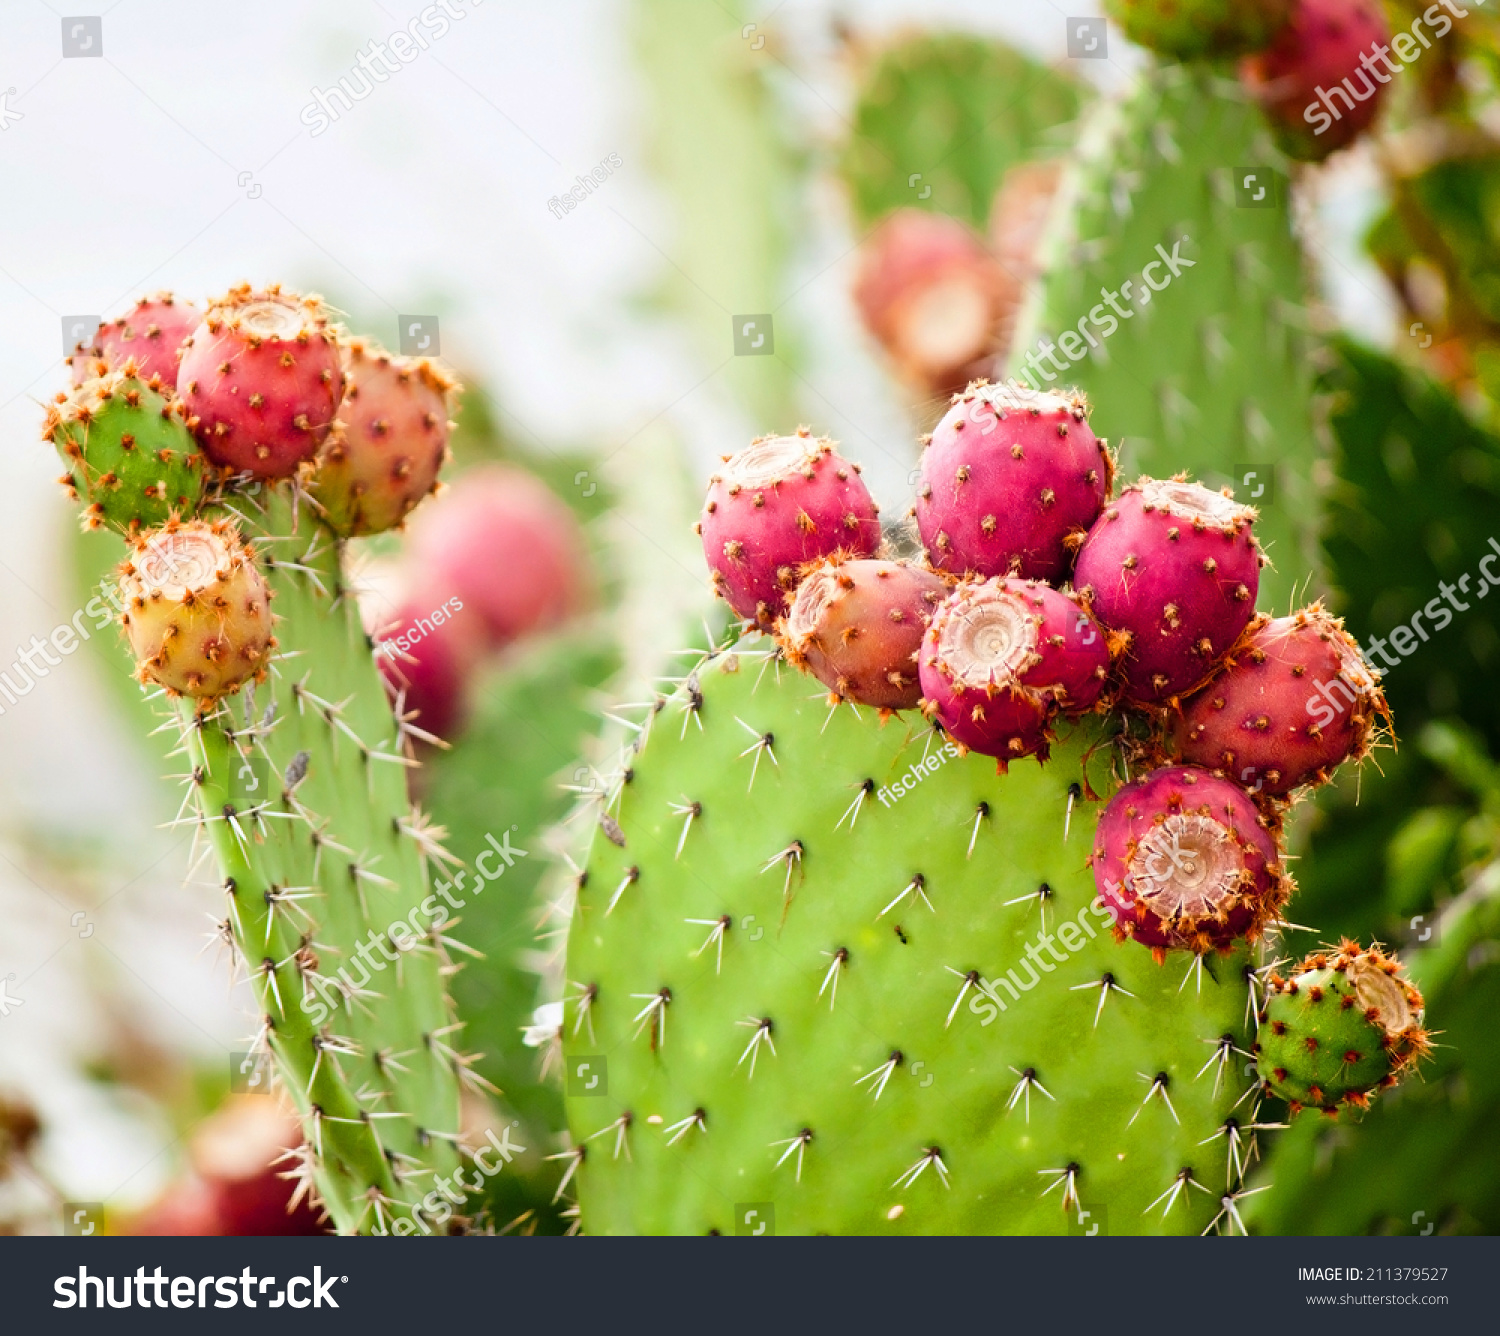 Prickly pear cactus close up with fruit in red color, cactus spines. #211379527